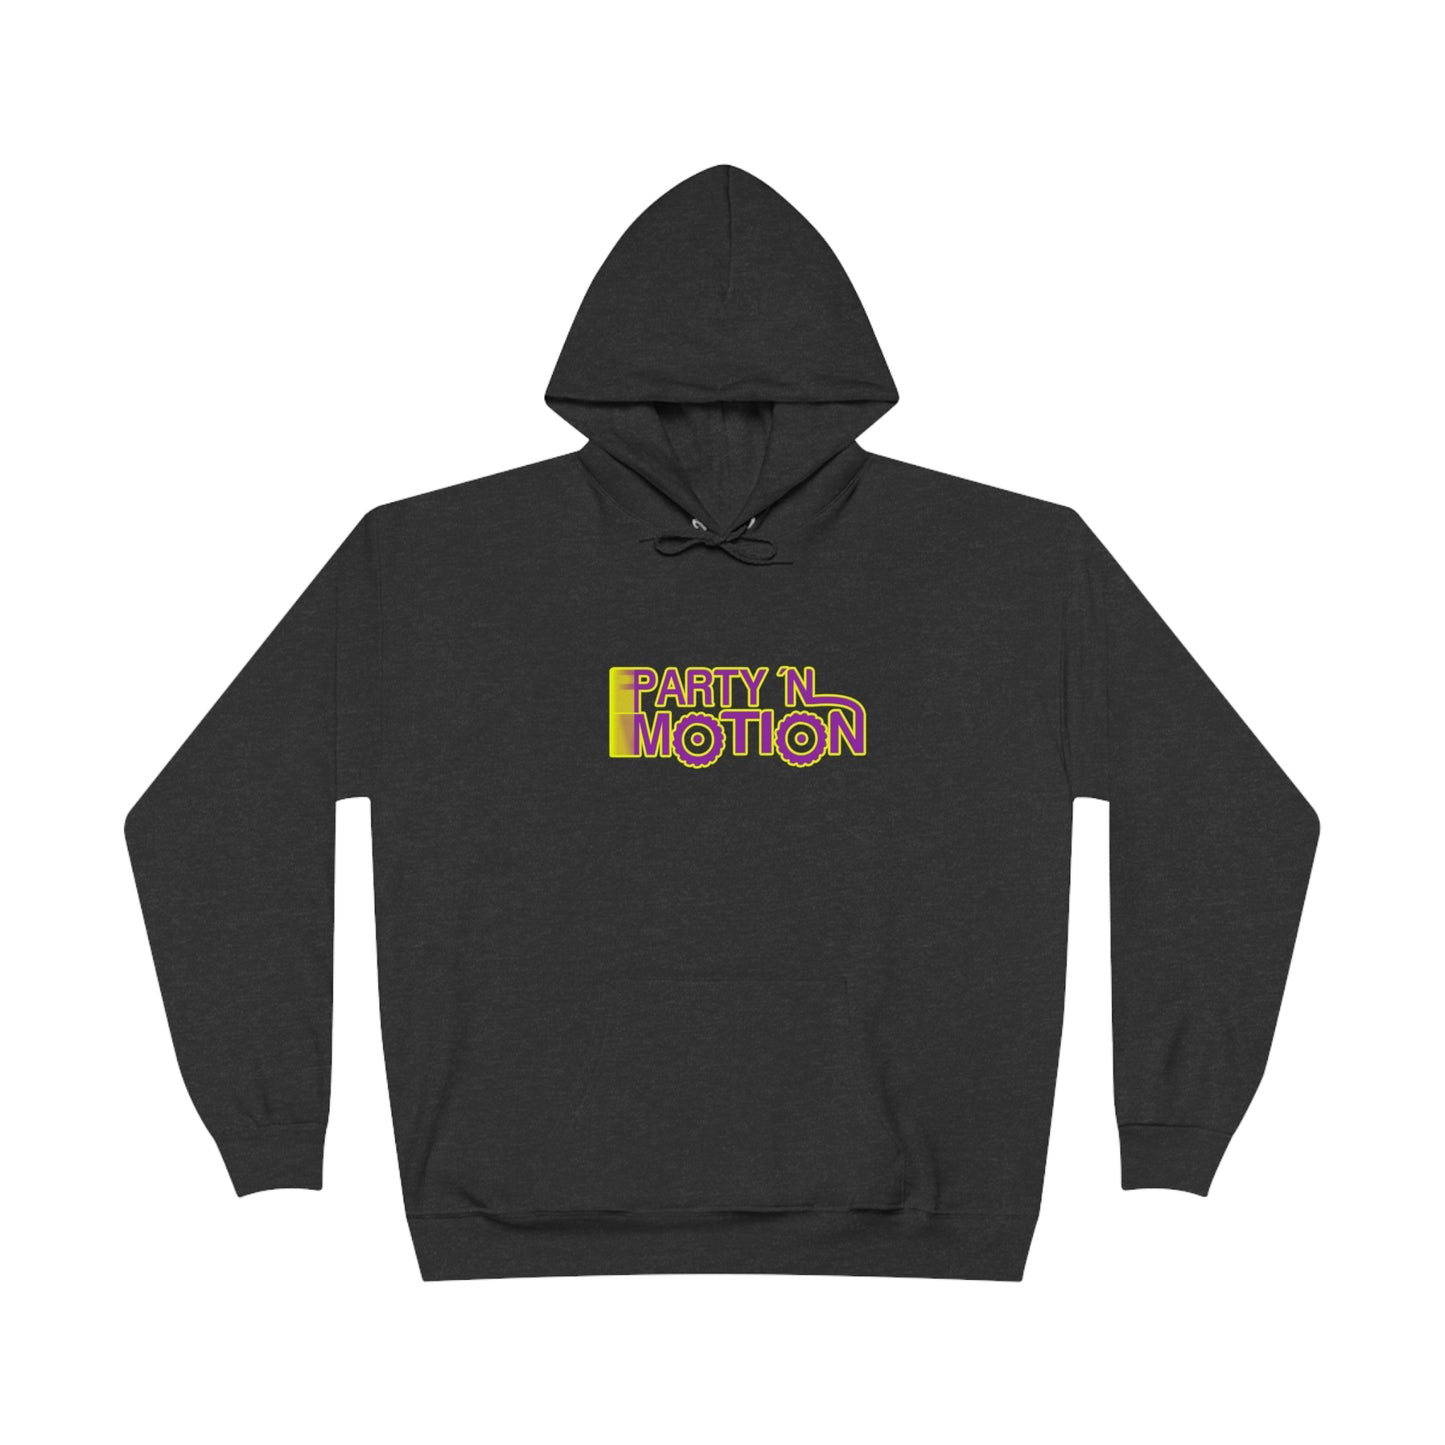 PartyNMotion EcoSmart Pullover Hoodie Sweatshirt (PNM logo front, blank back)